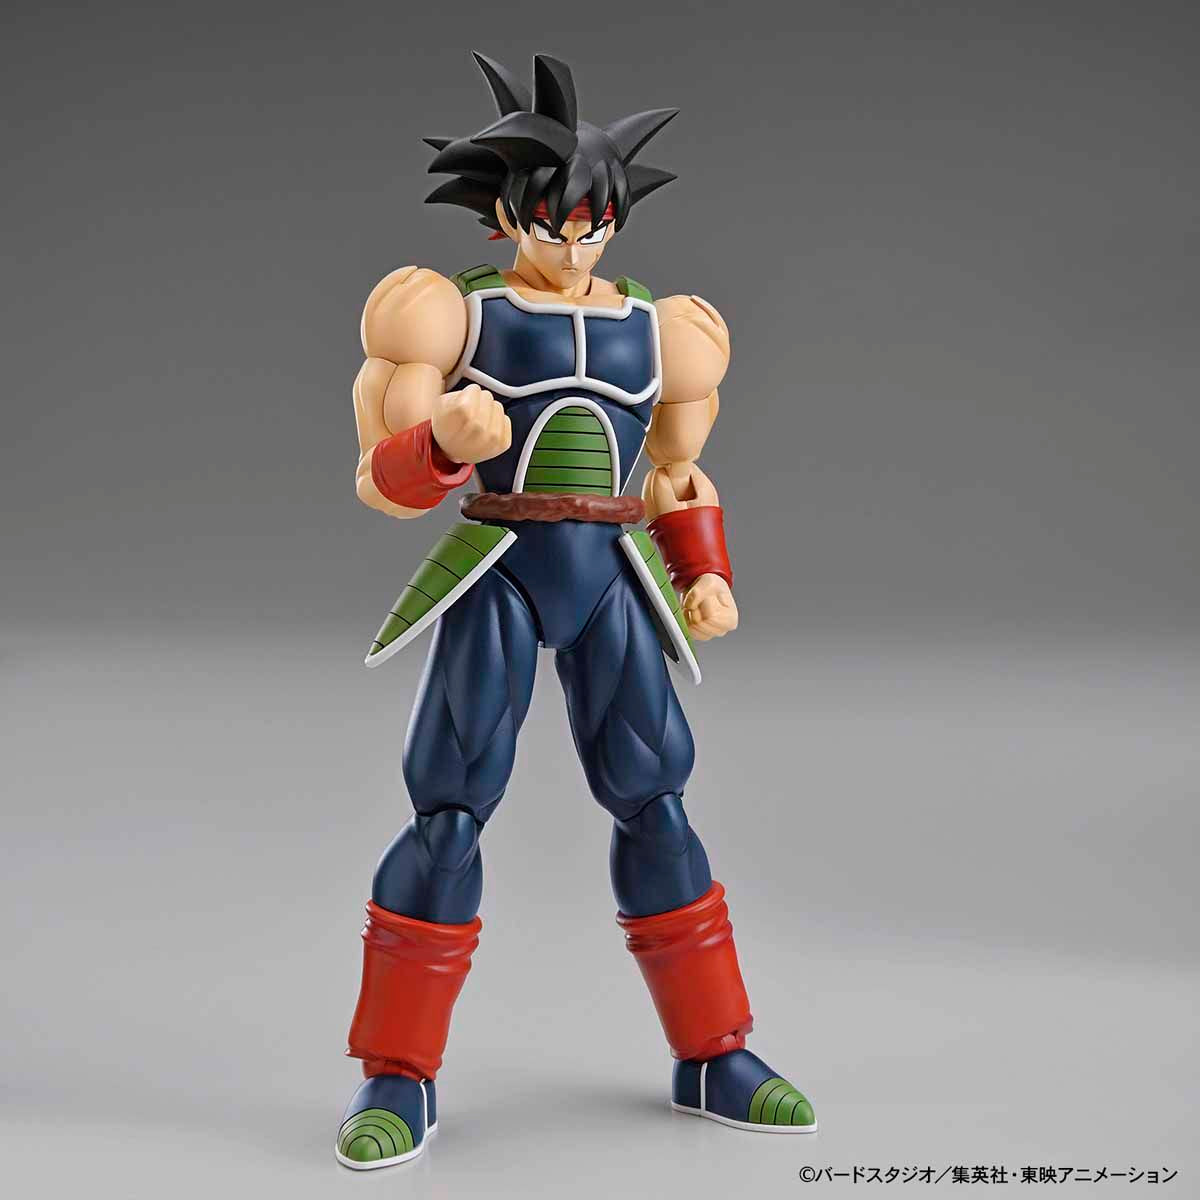 Dragon Ball - Bardock - Figure-rise Standard Model Kit, Plastic model kit of Goku's father Bardock with Muscle Build System, high range of motion, and effect parts, Nippon Figures